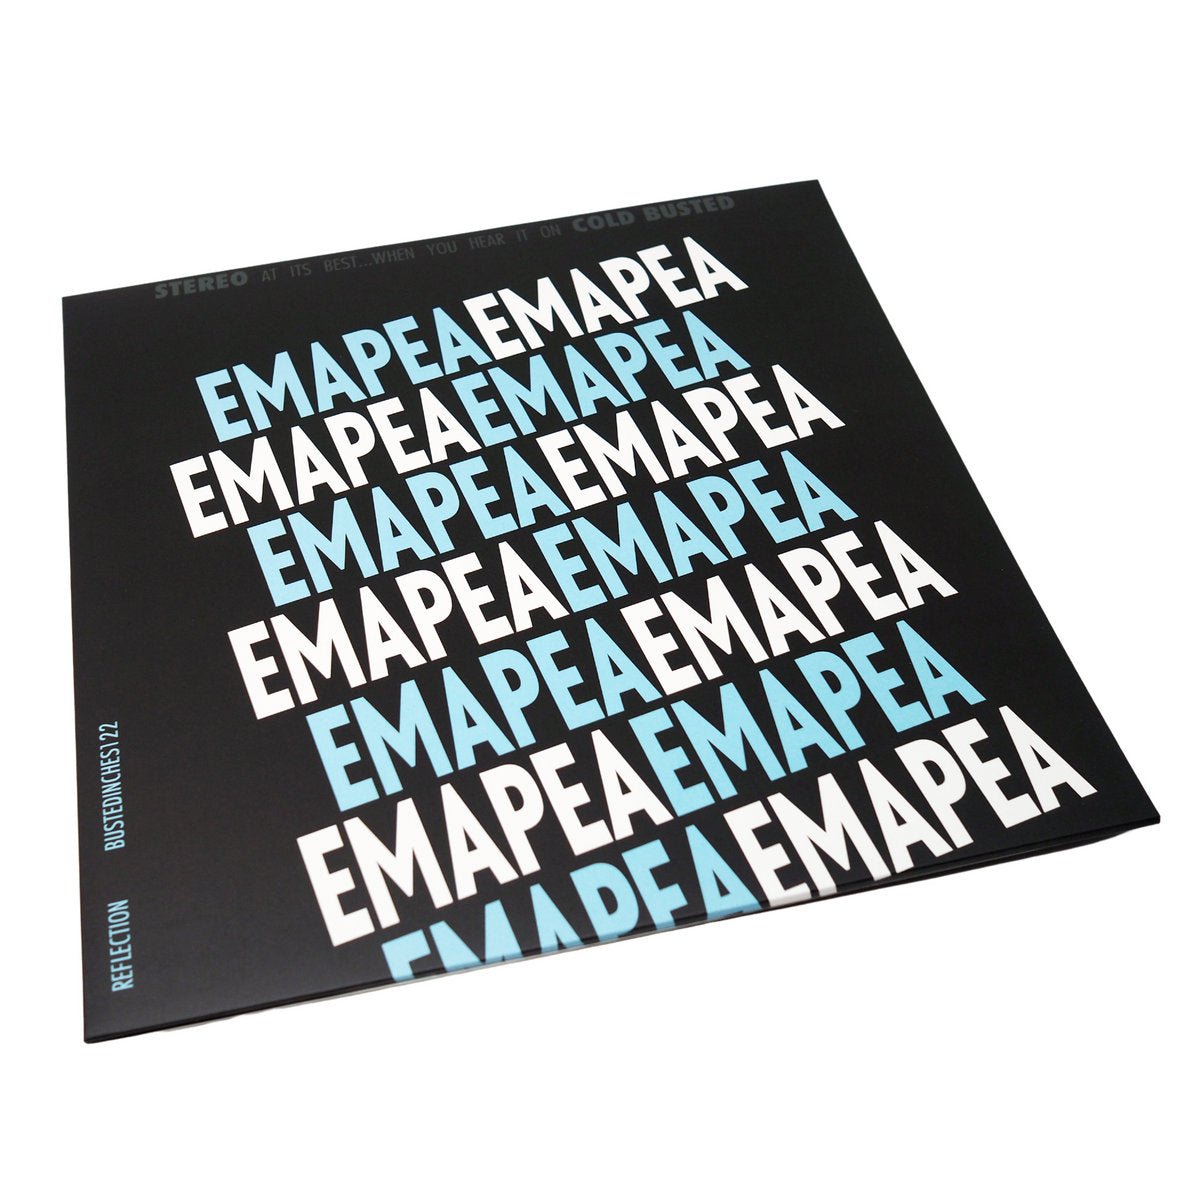 Emapea - Reflection - Limited Edition Inside-Out 12 Inch Vinyl - Cold Busted